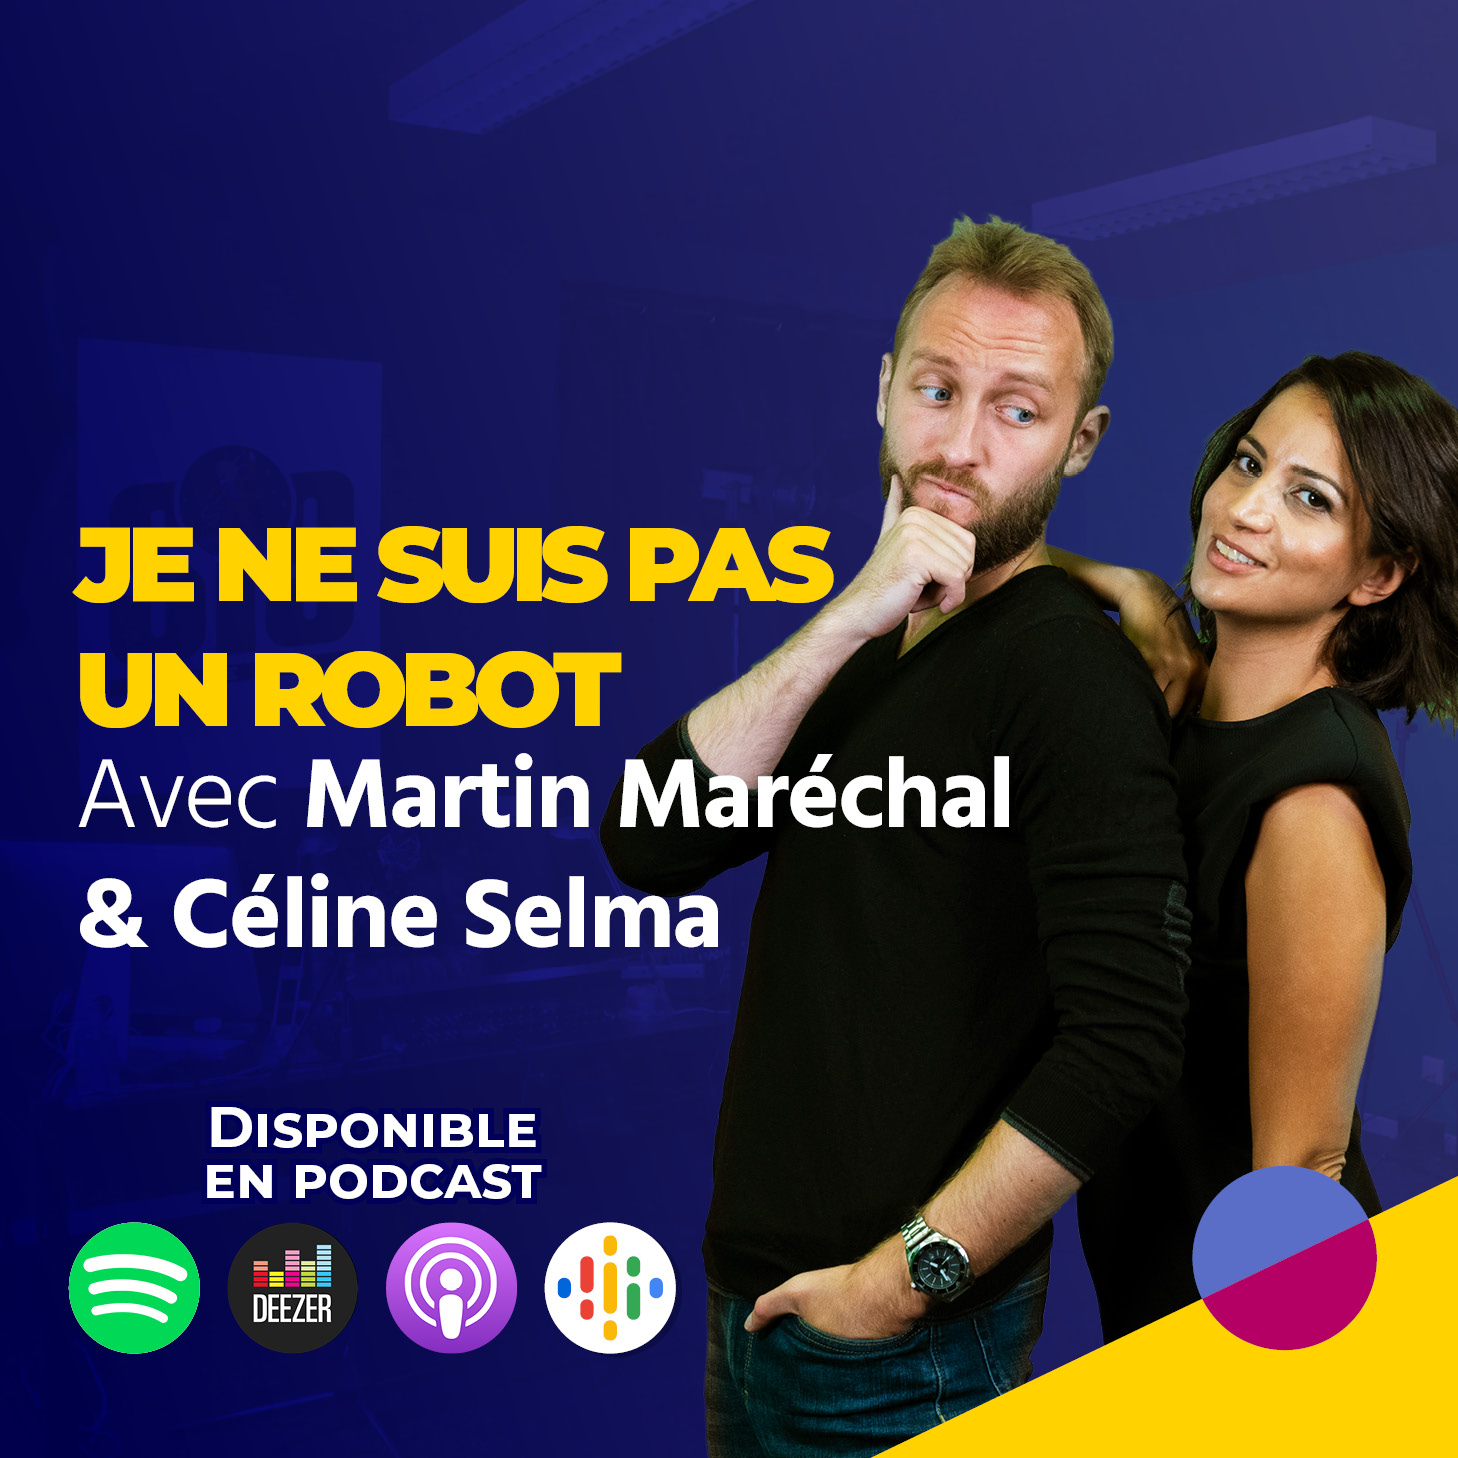 SISRadio_Podcasts_Emissions_Chroniques-SQUARE-ReecouteNoms43.jpg (353 KB)